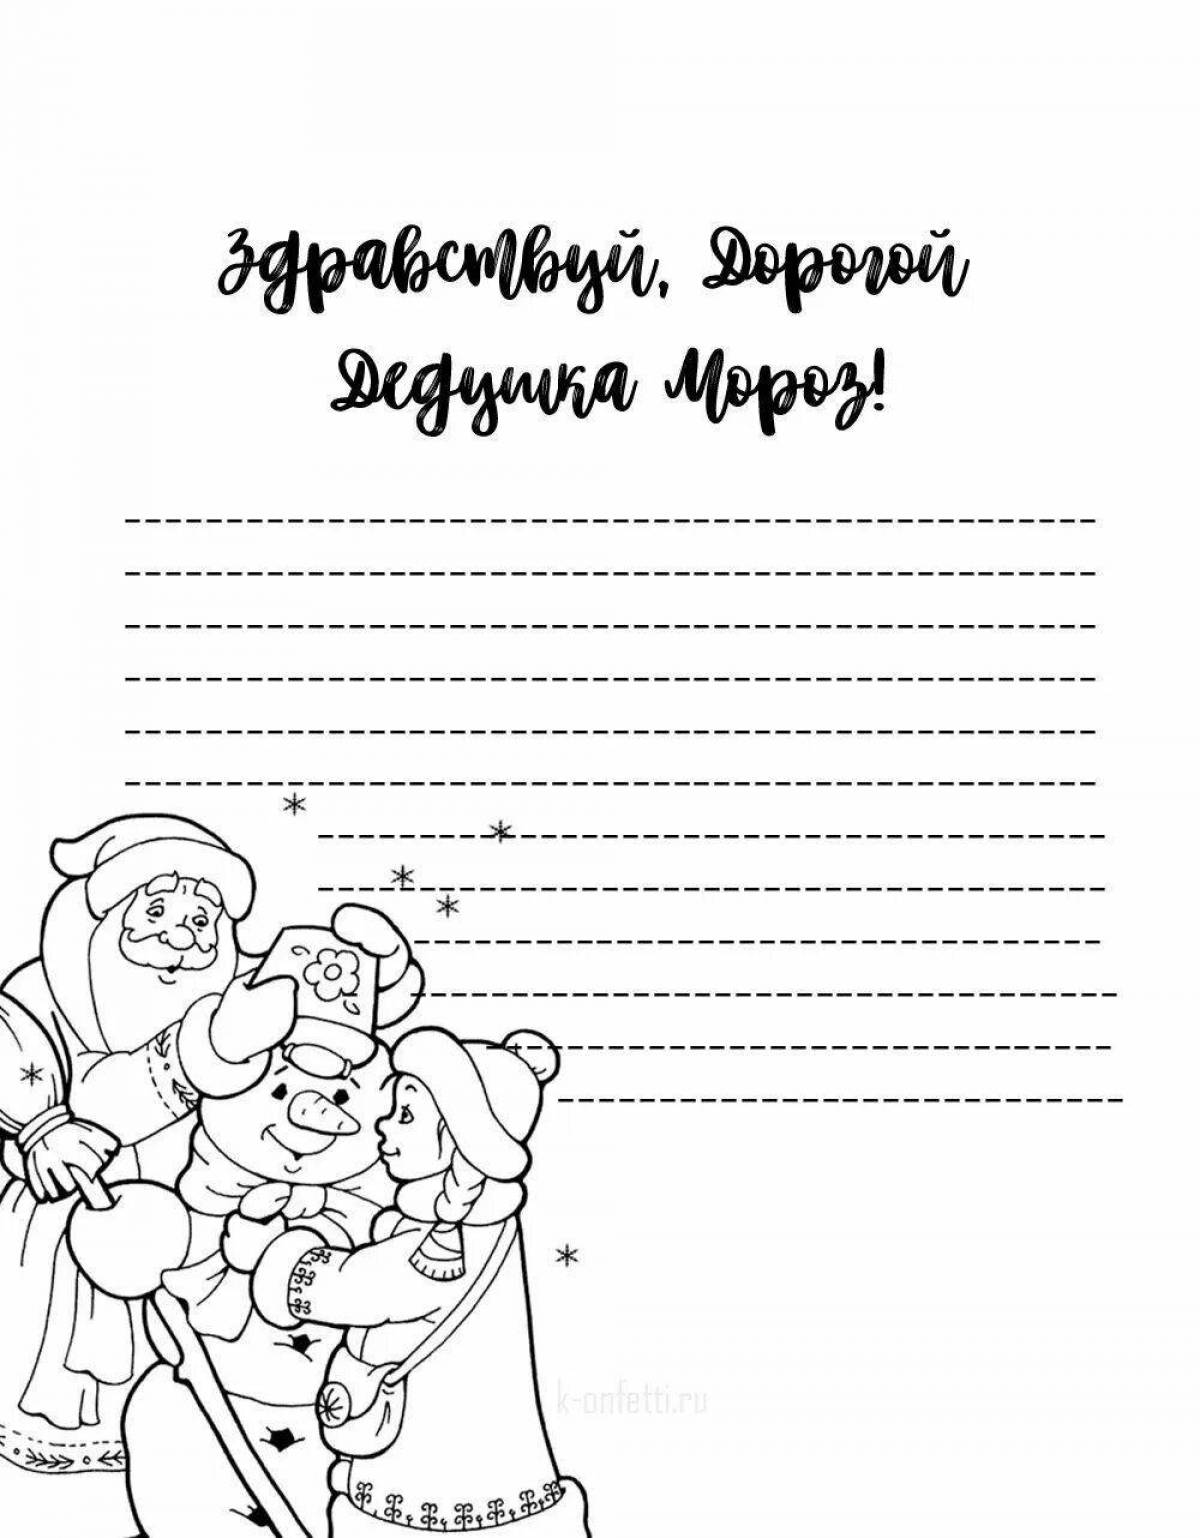 Luxury coloring letter template to santa claus